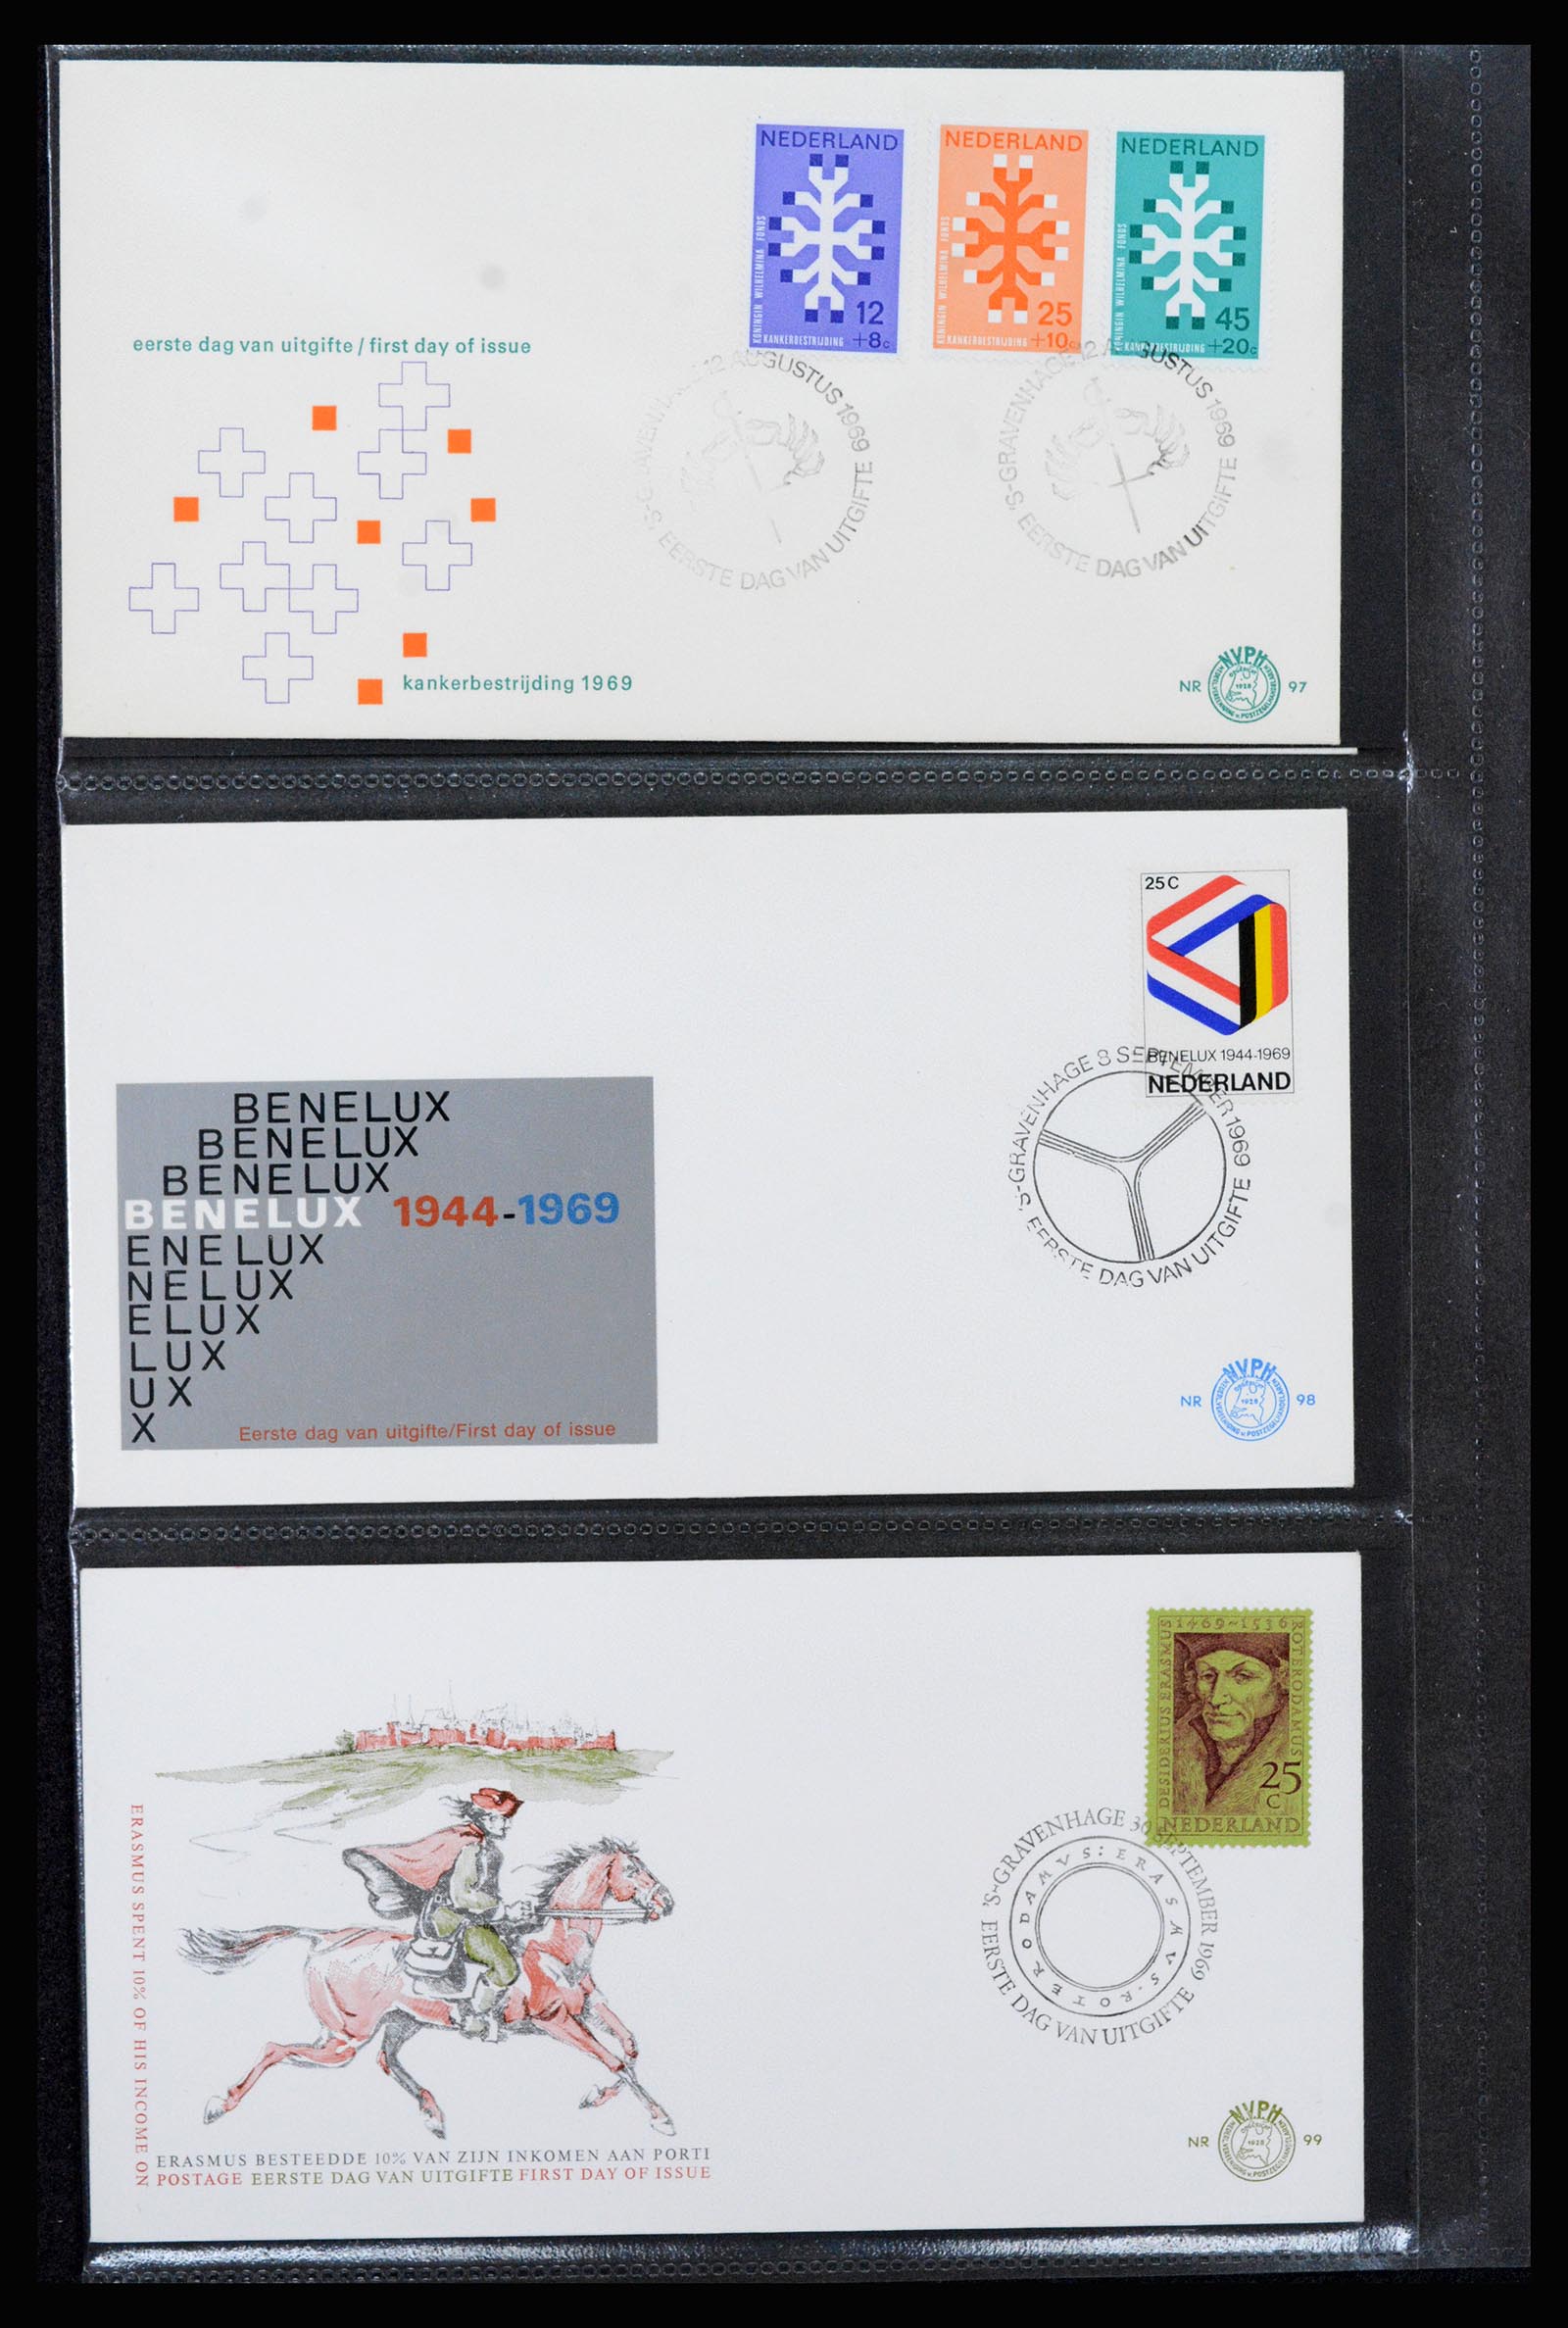 37264 033 - Stamp collection 37264 Netherlands FDC's 1950-1975.